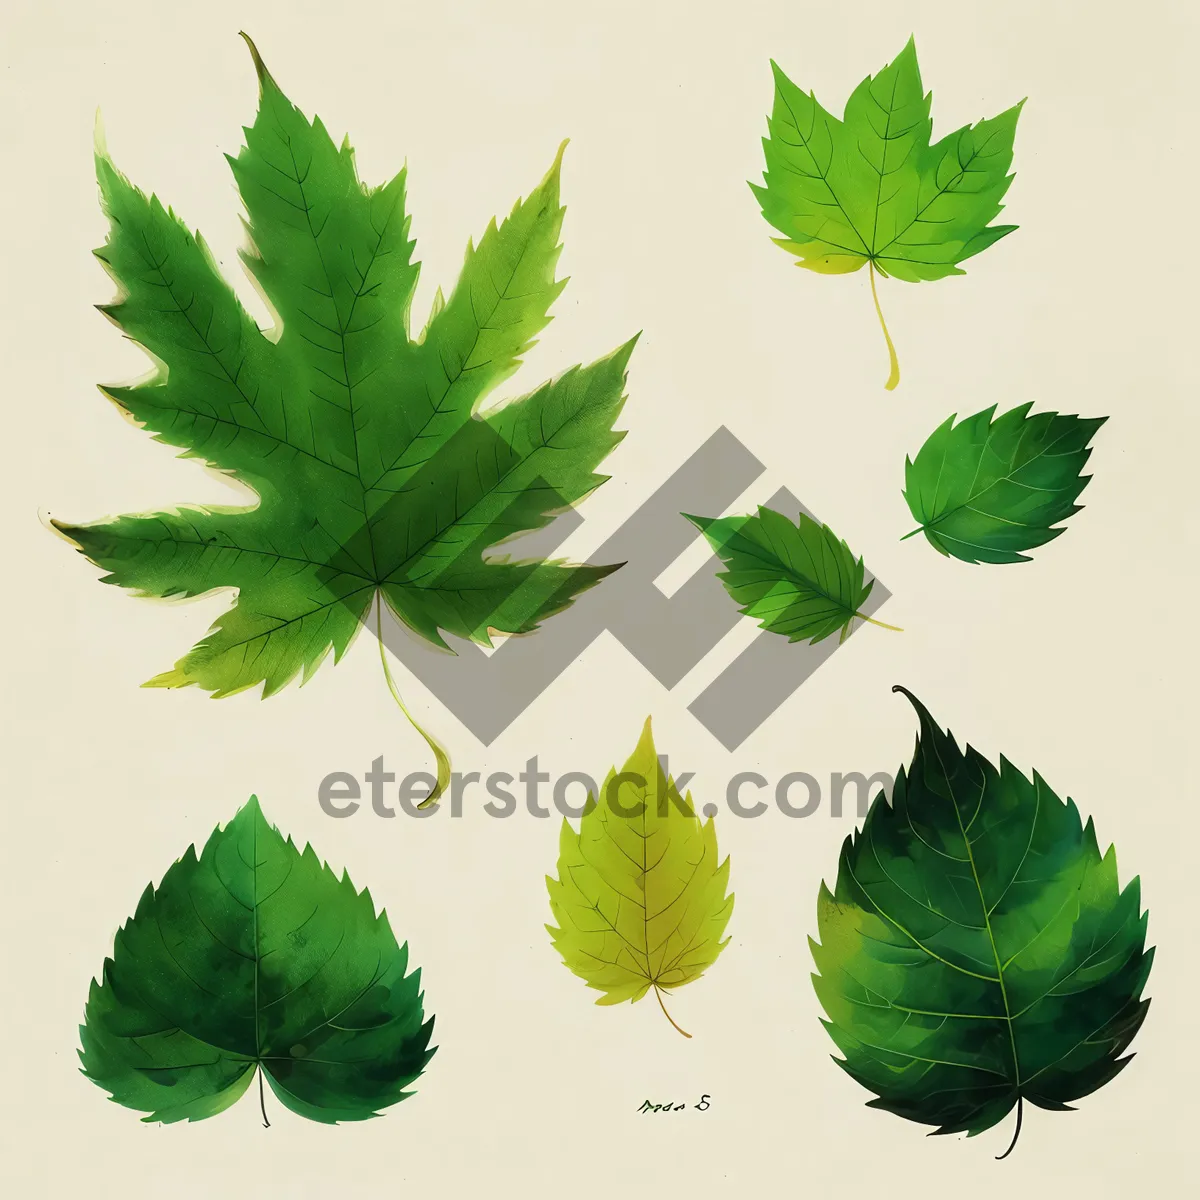 Picture of Lush Green Foliage: Refreshing Summer Leaves and Herbs